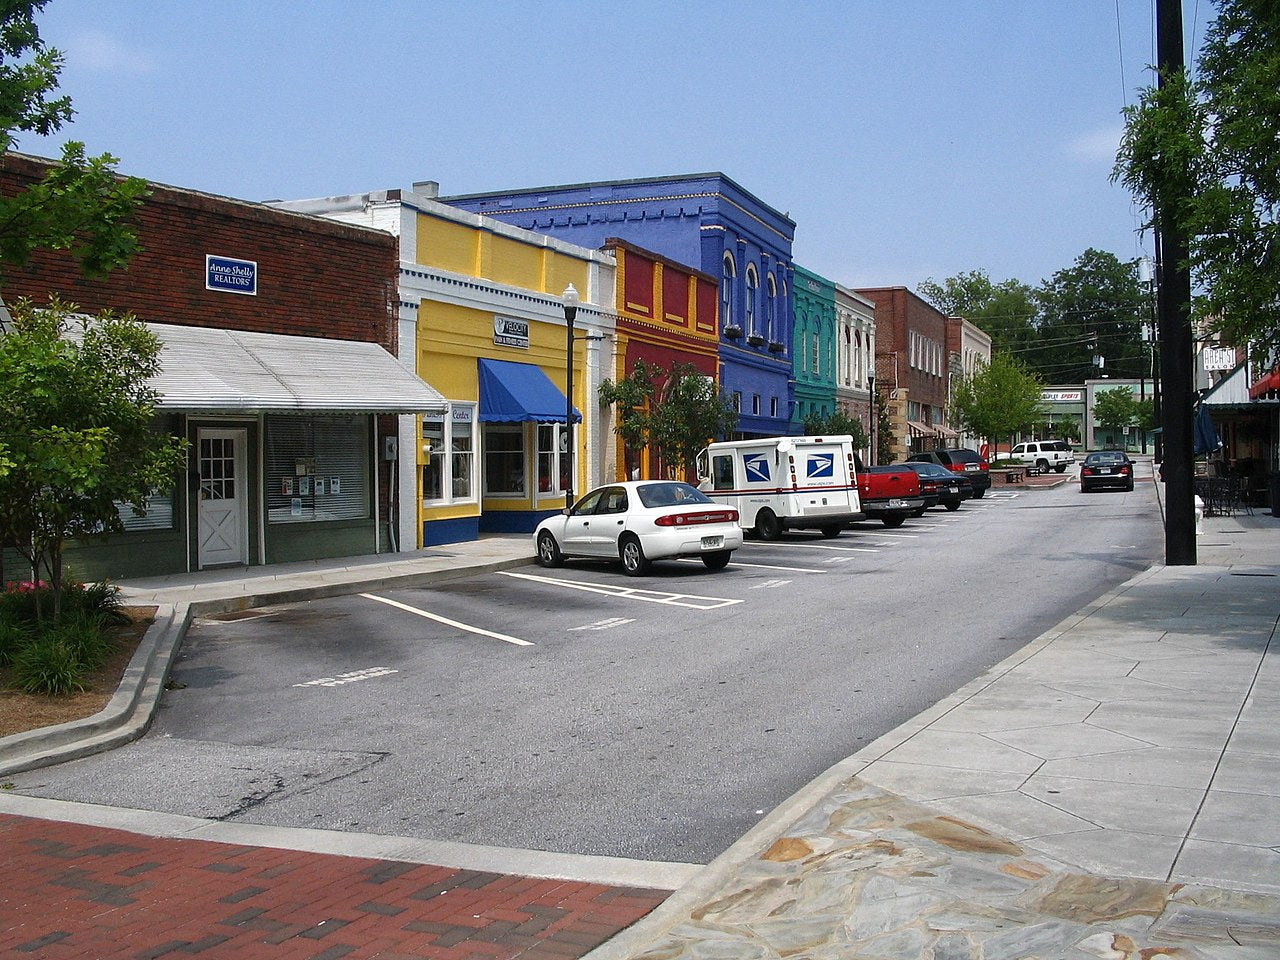 Haus and Hues in Conyers